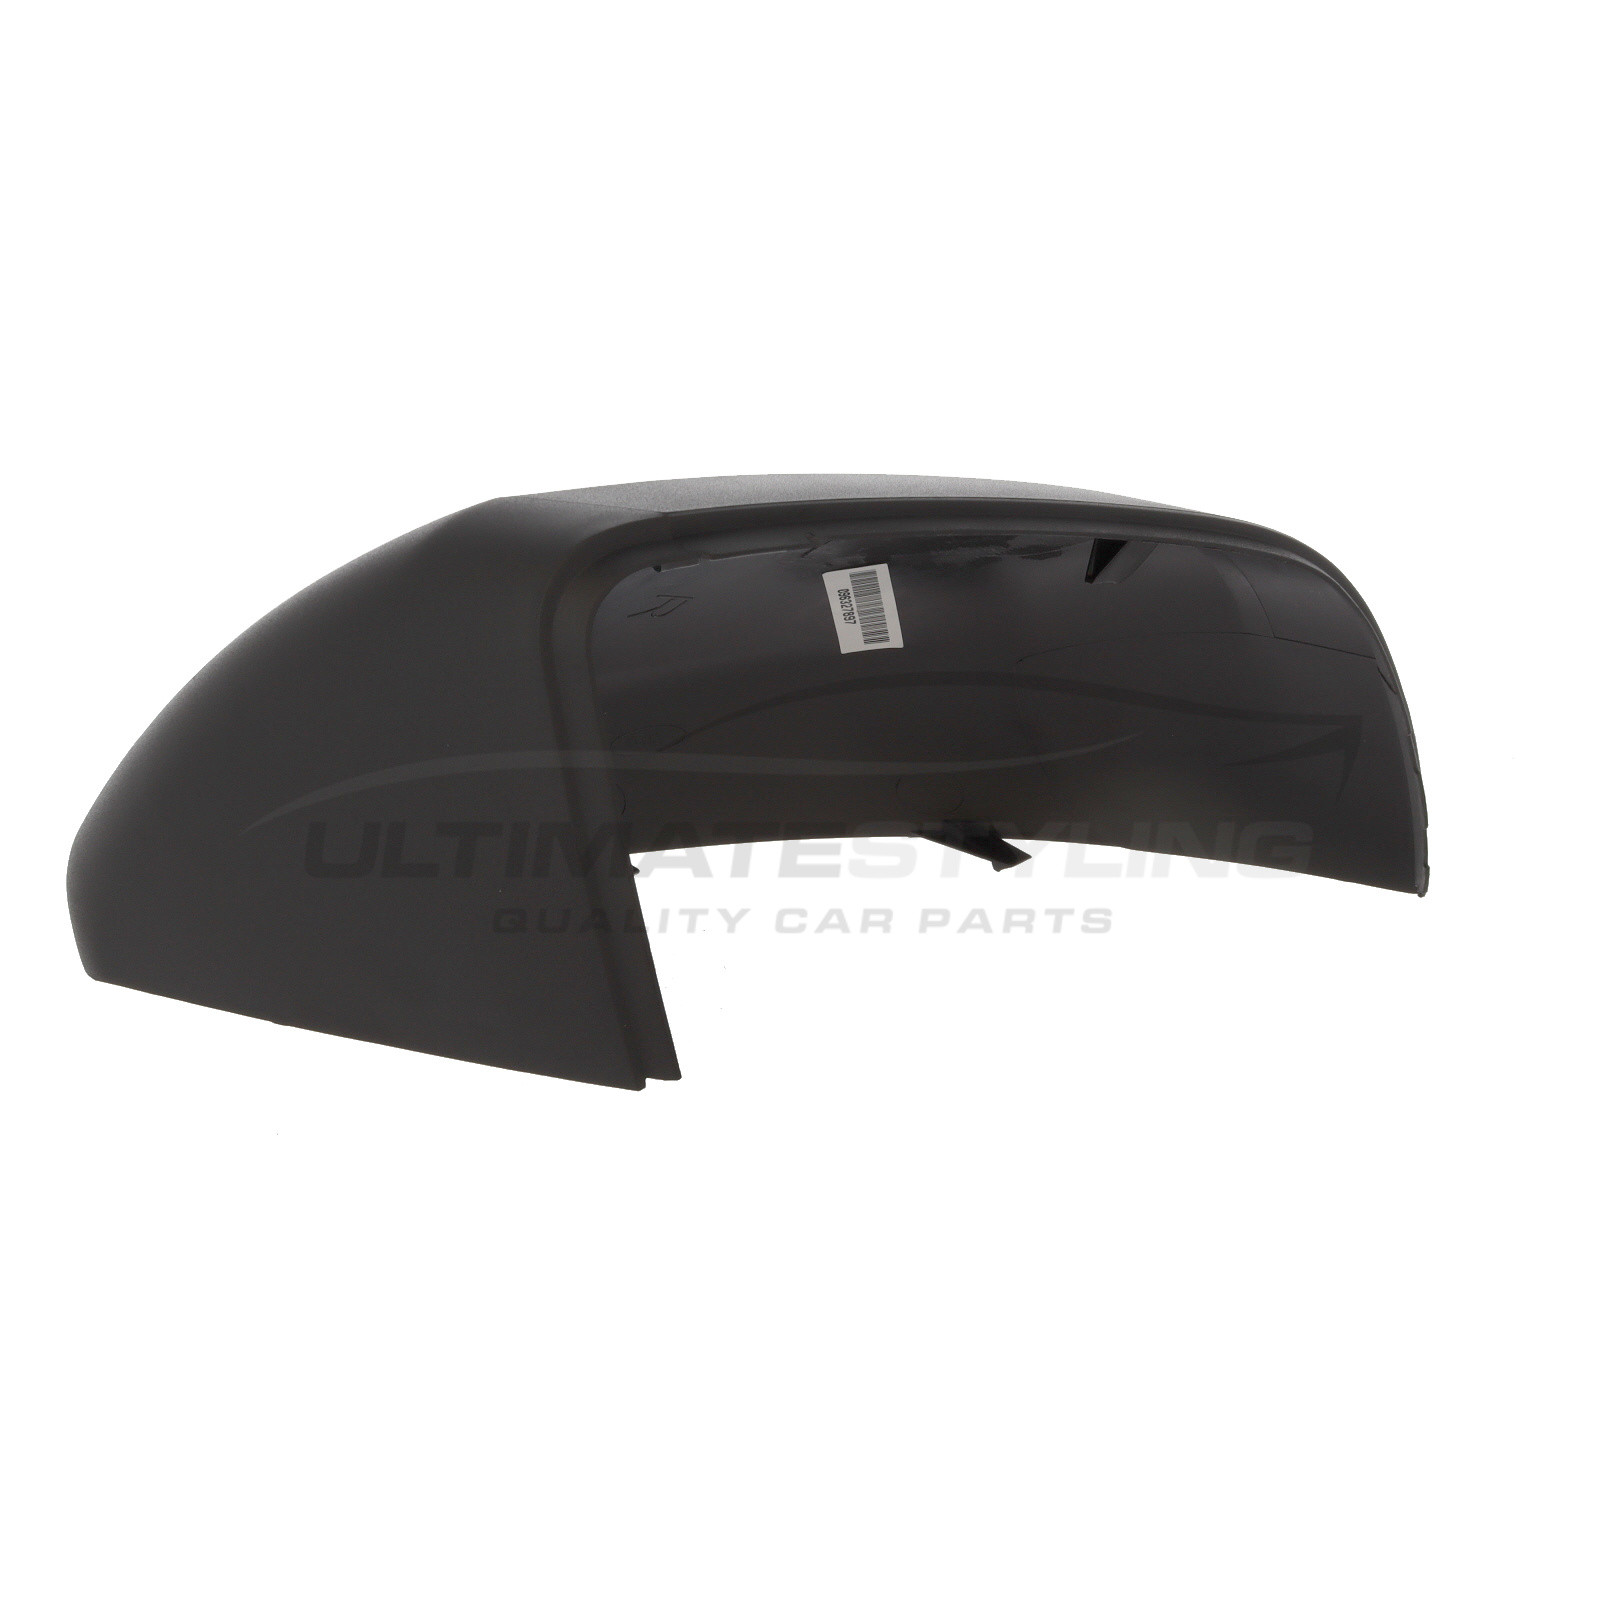 Mercedes Benz Vito Wing Mirror Cover - Drivers Side (RH) - Black